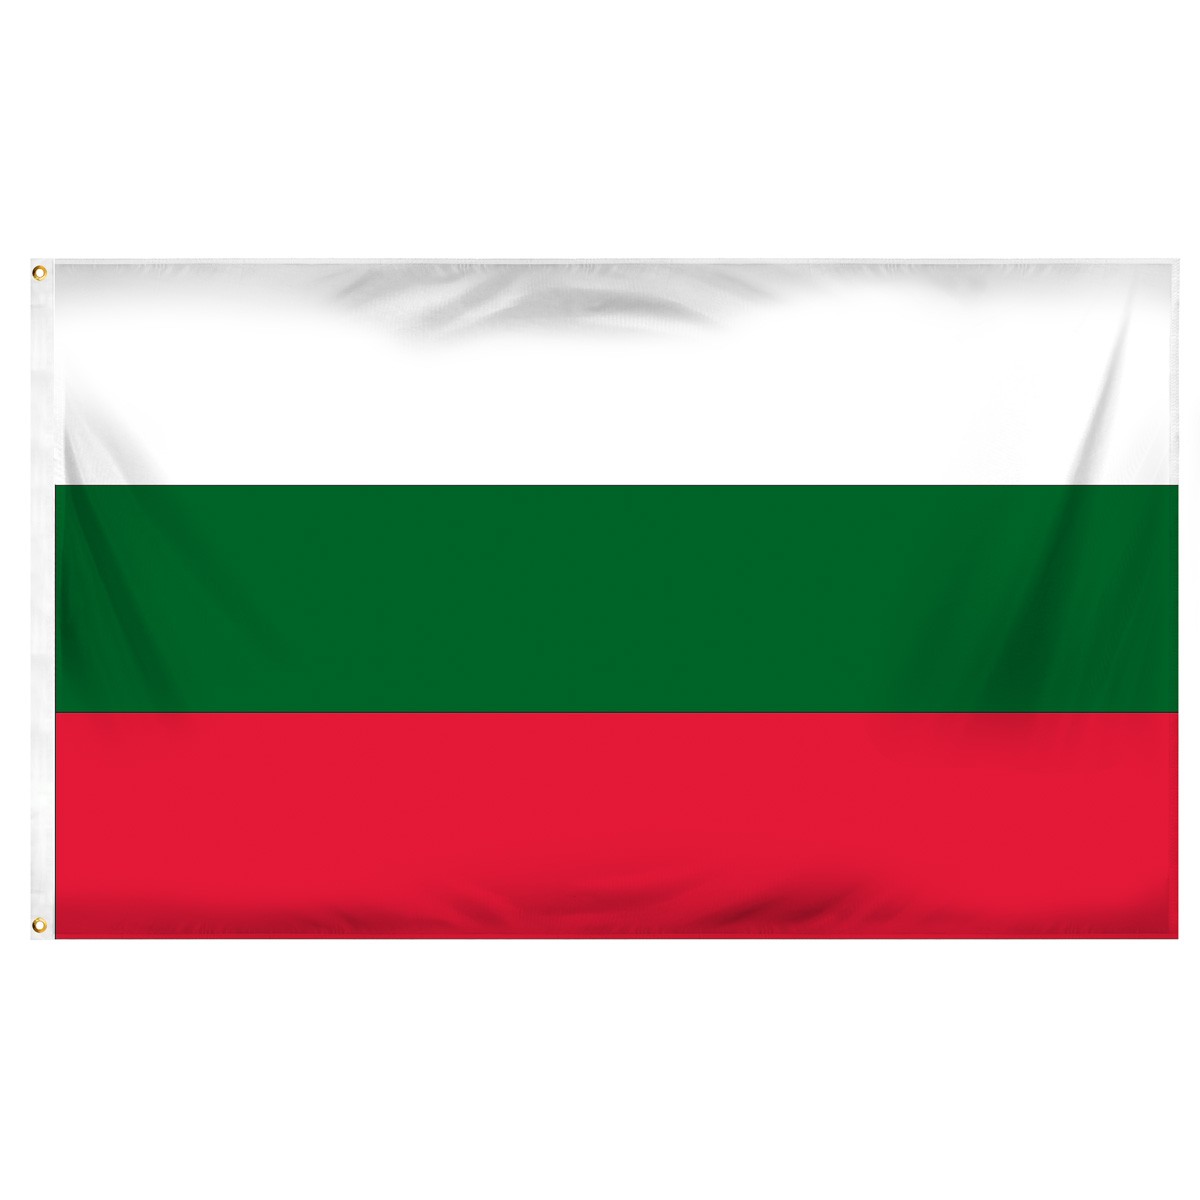 Bulgaria Submit Flags and Flags